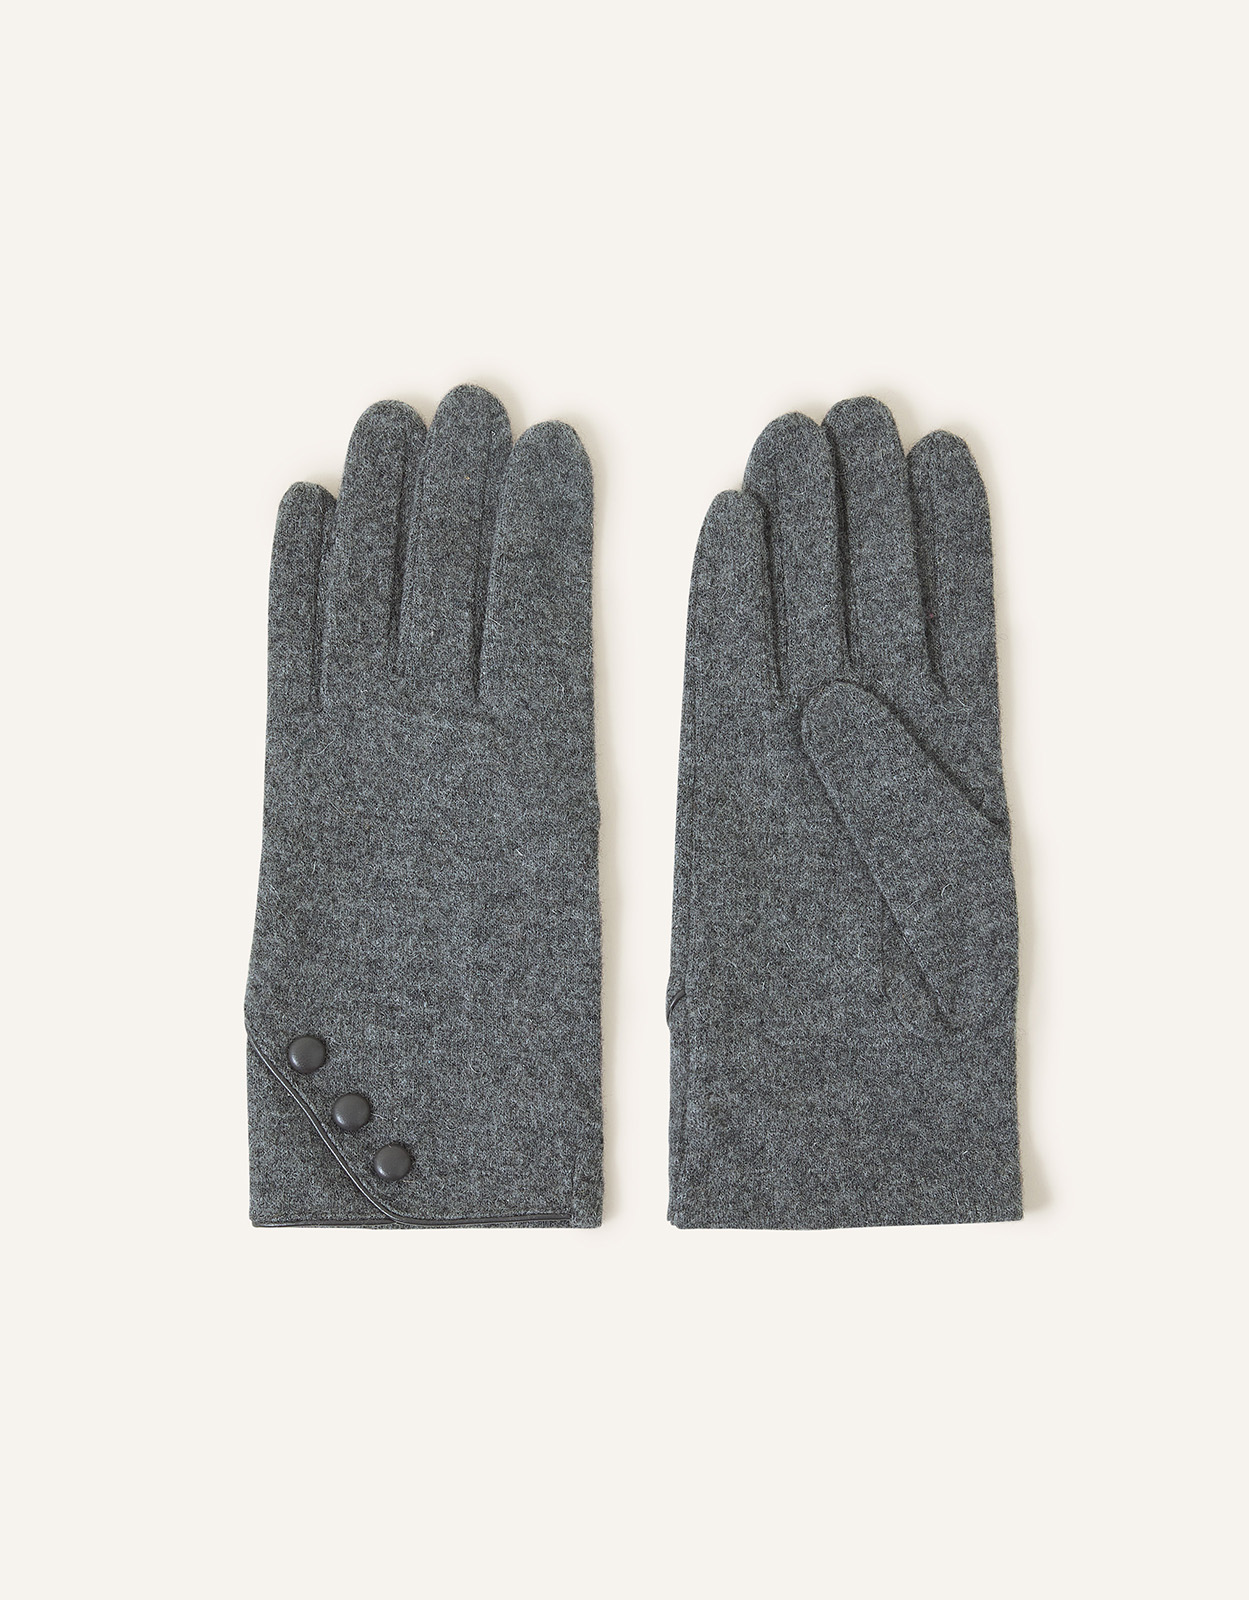 Accessorize Women's Touchscreen Button Gloves in Wool Blend Grey, Size: One Size